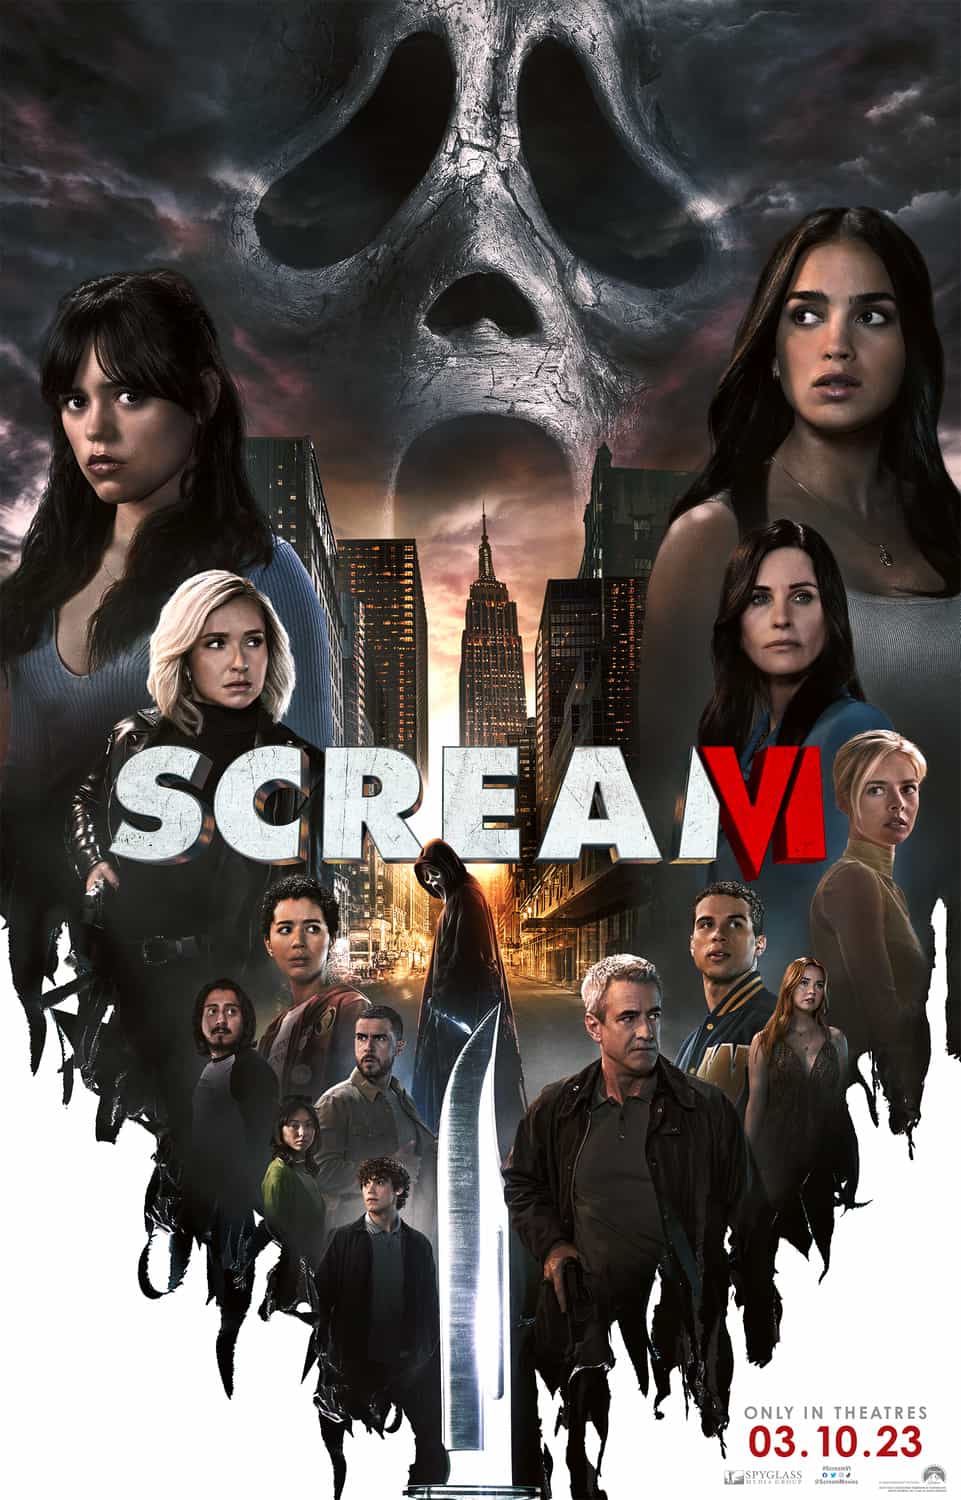 A new trailer and poster released for Scream 6 starring Melissa Barrera - movie UK release date 31st March 2023 #scream6